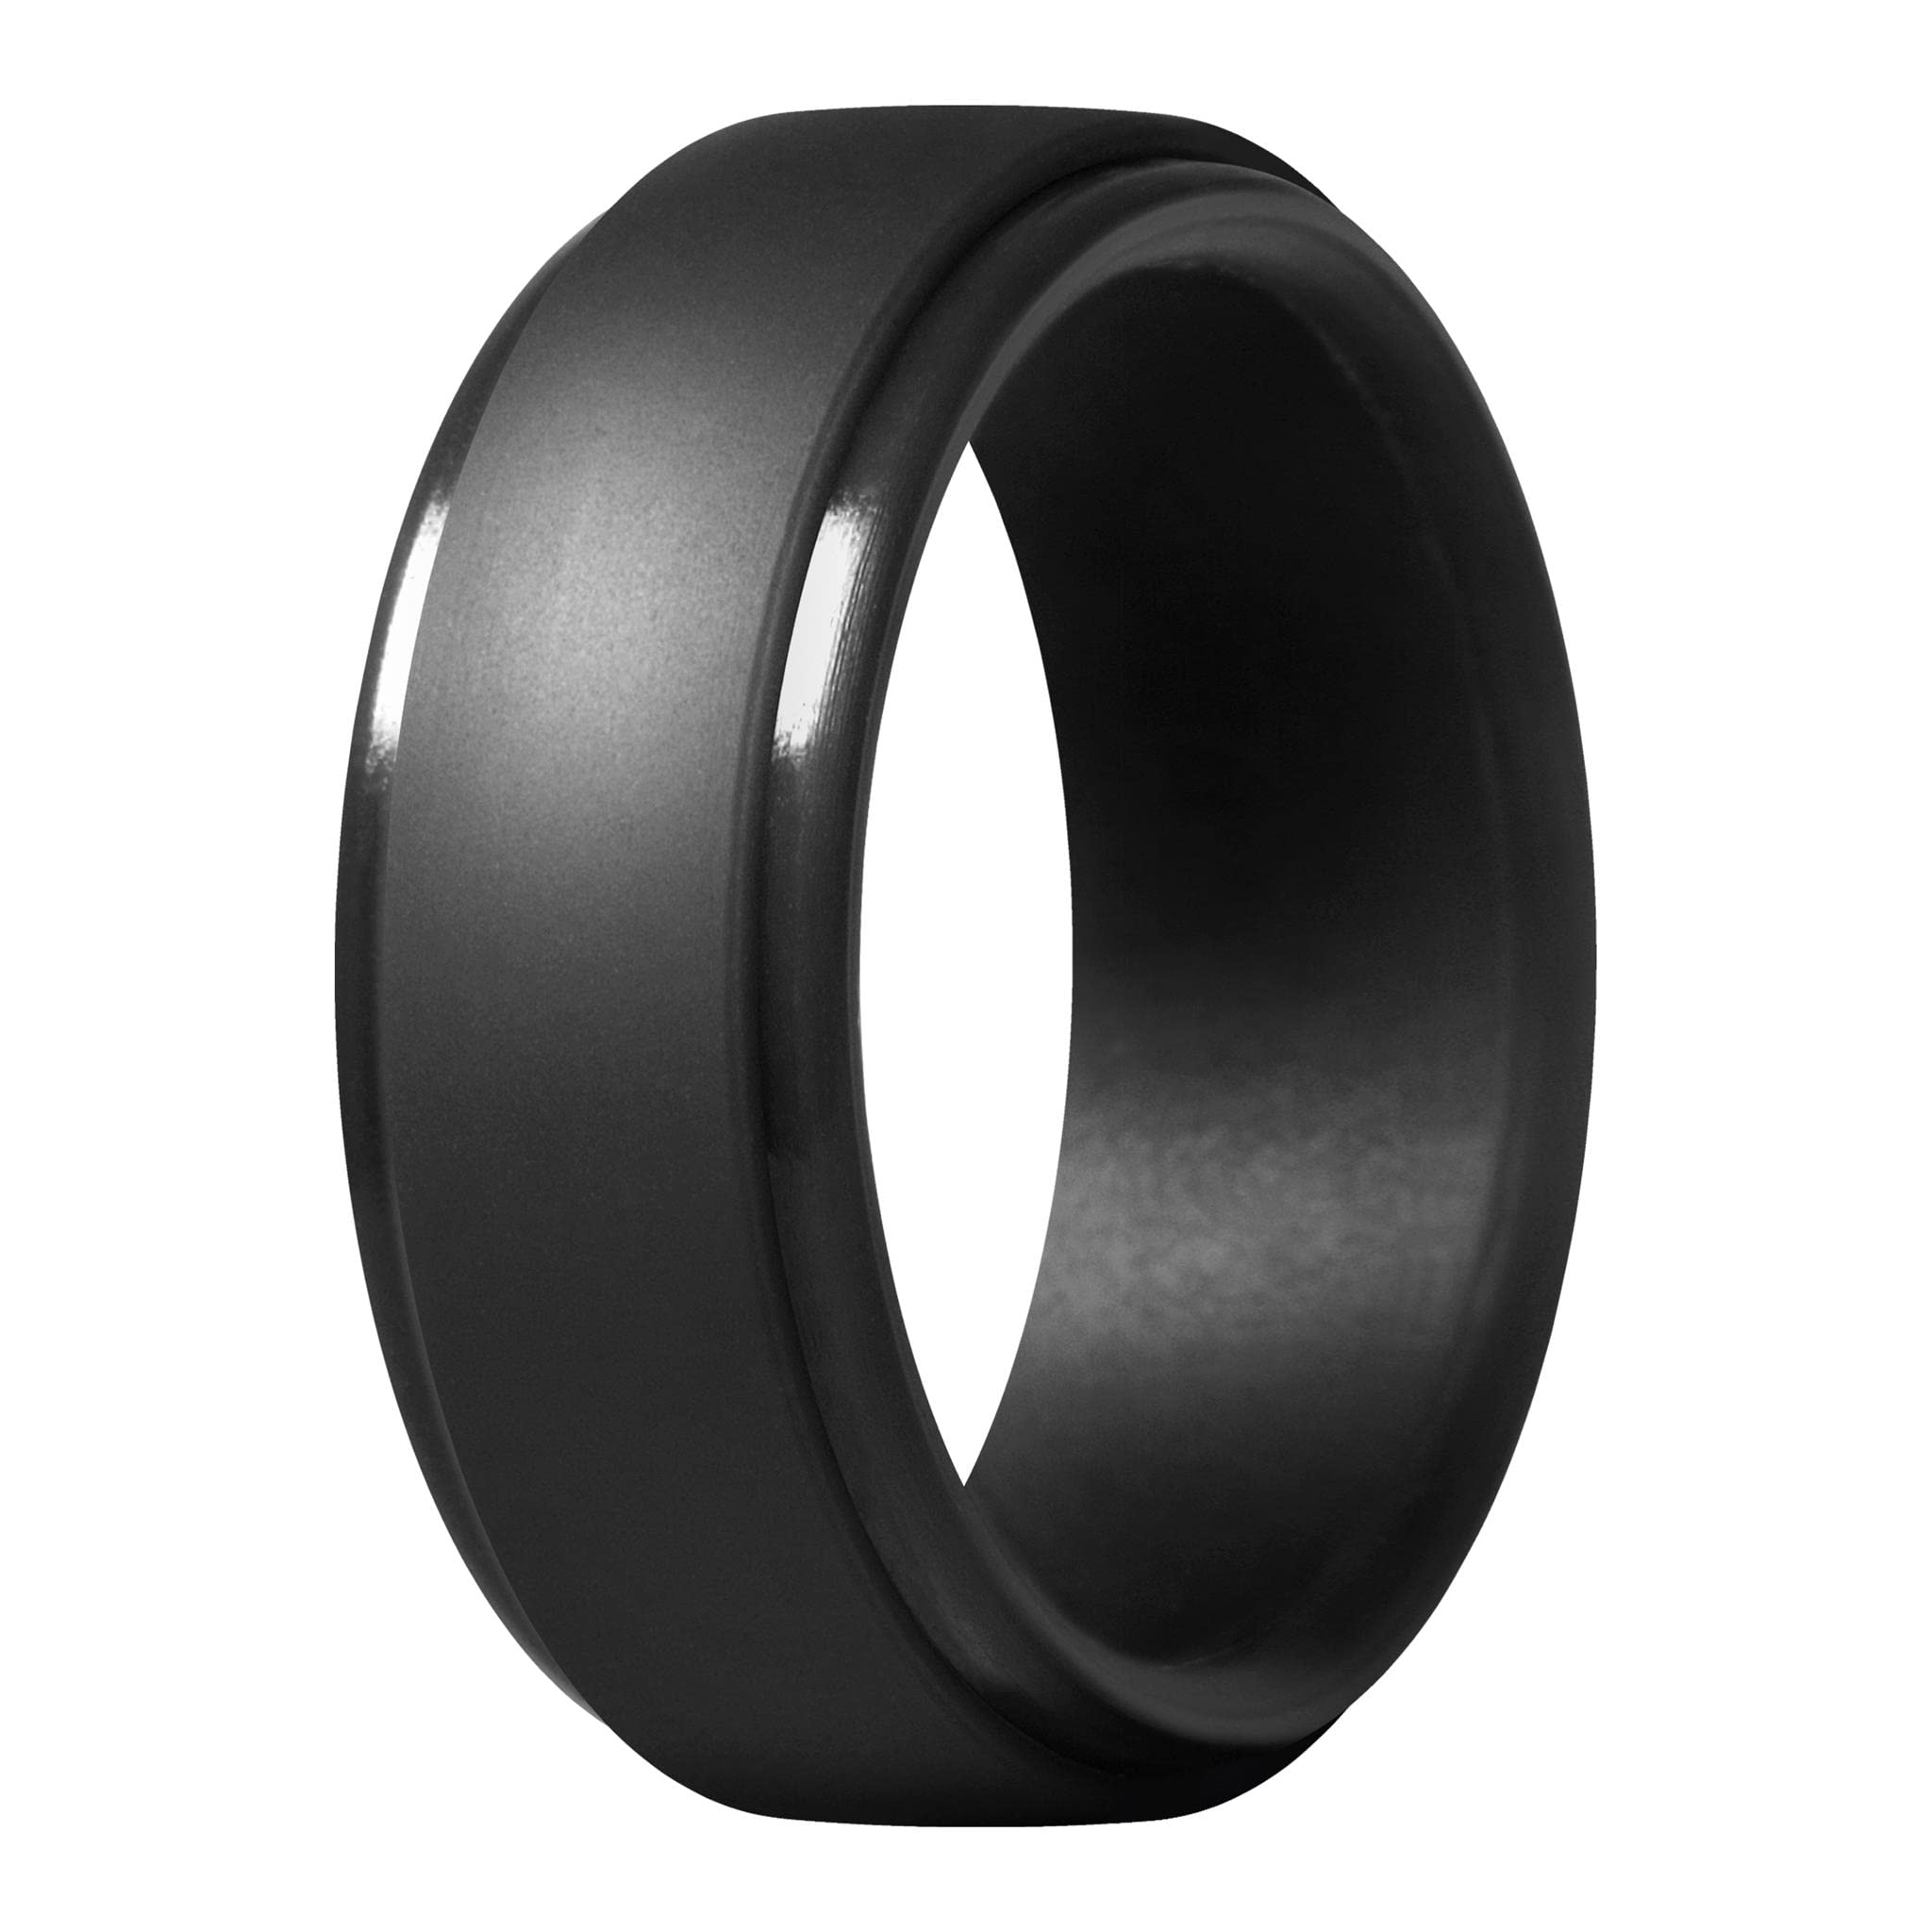 ThunderFit Silicone Ring Men, Step Edge Rubber Wedding Band, 10mm Wide, 2.5mm Thick